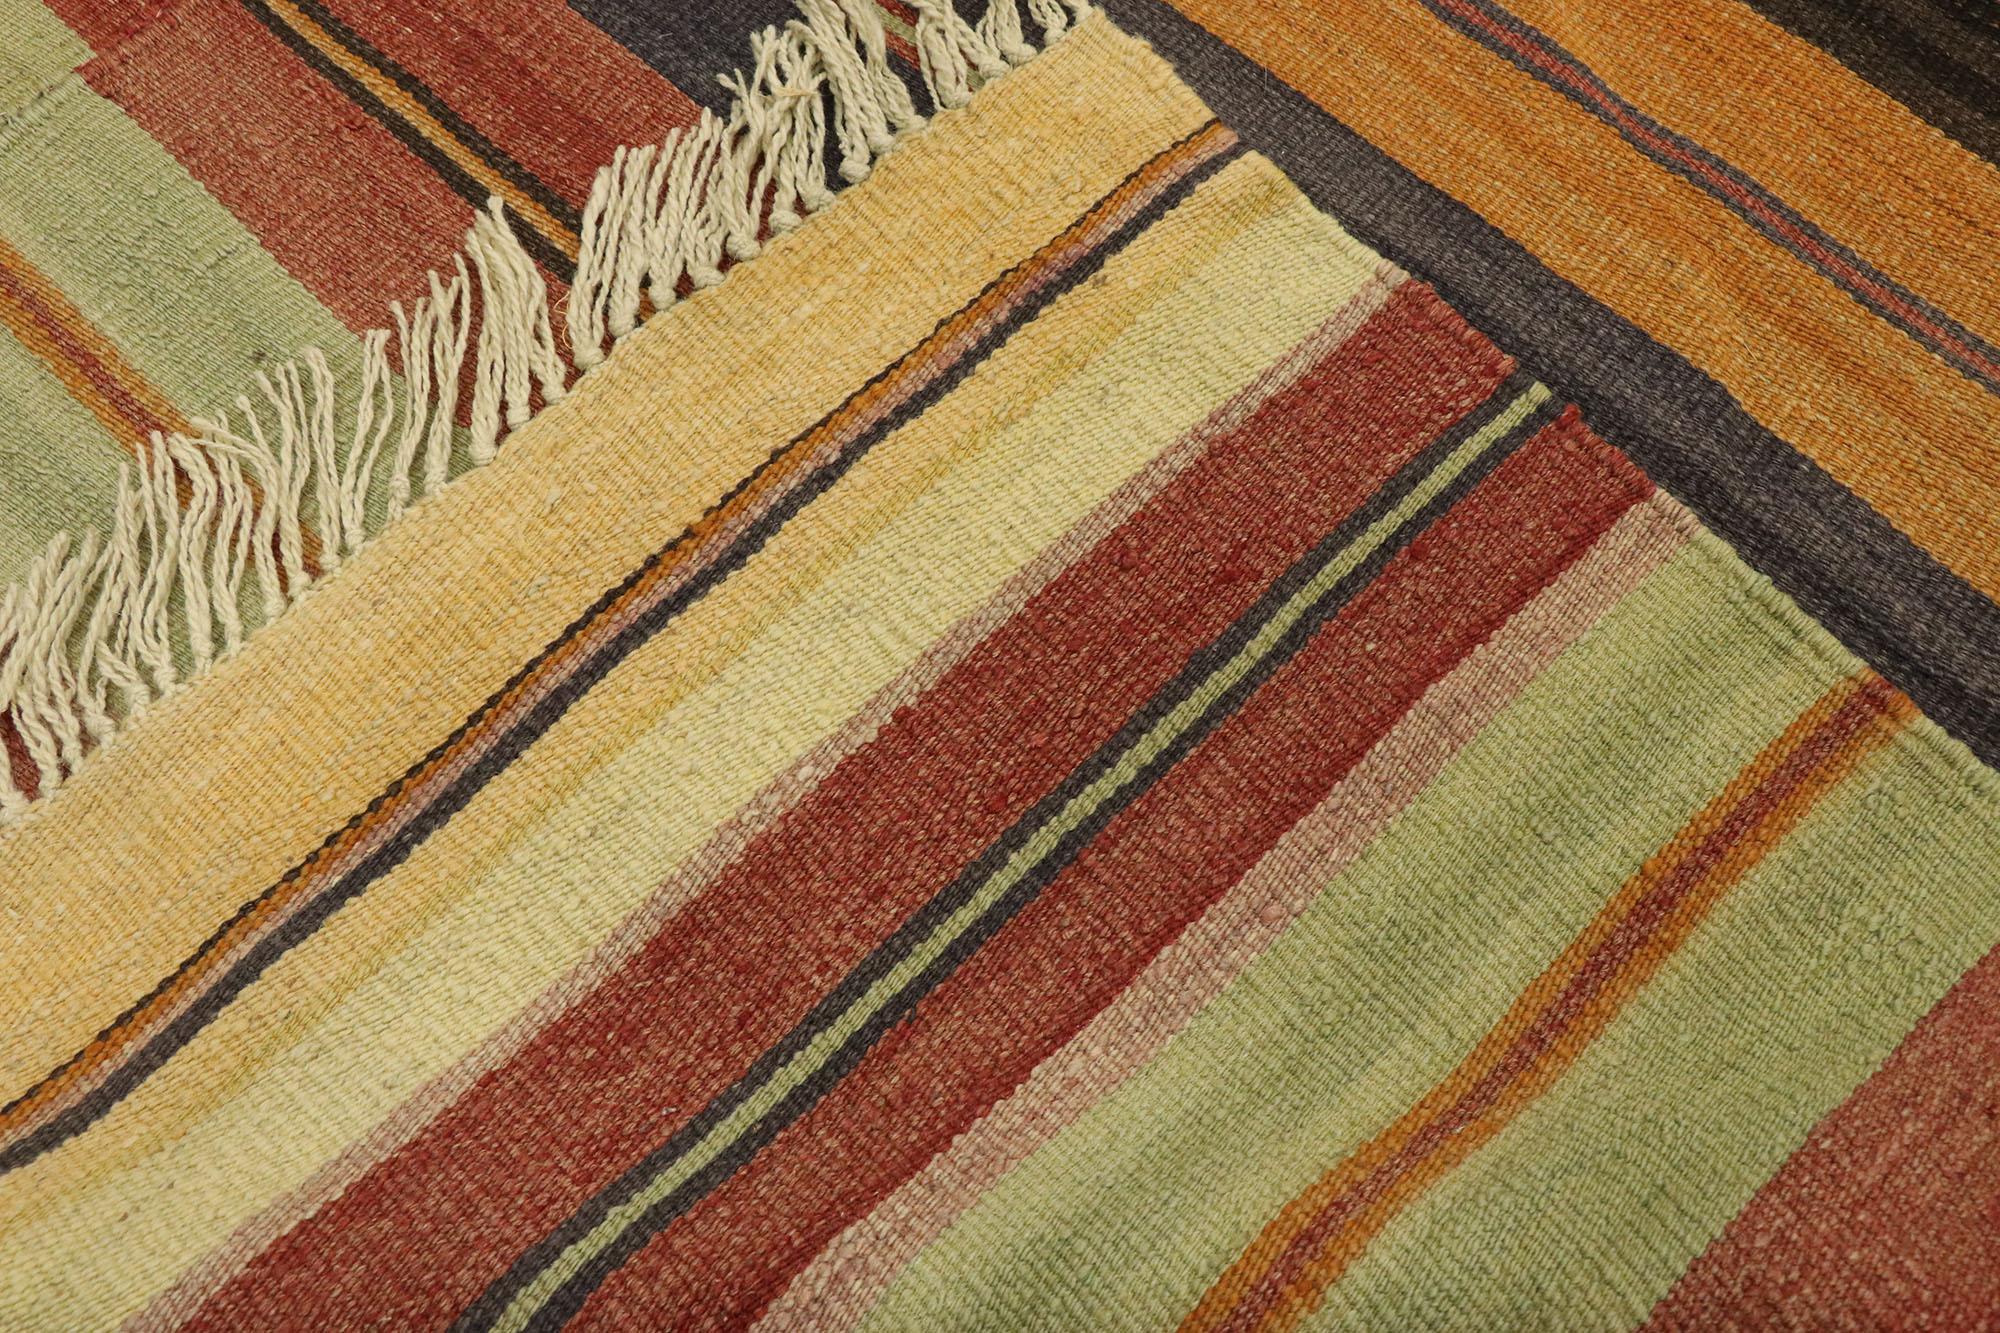 20th Century Distressed Vintage Turkish Striped Kilim Rug with Modern Rustic Cabin Style